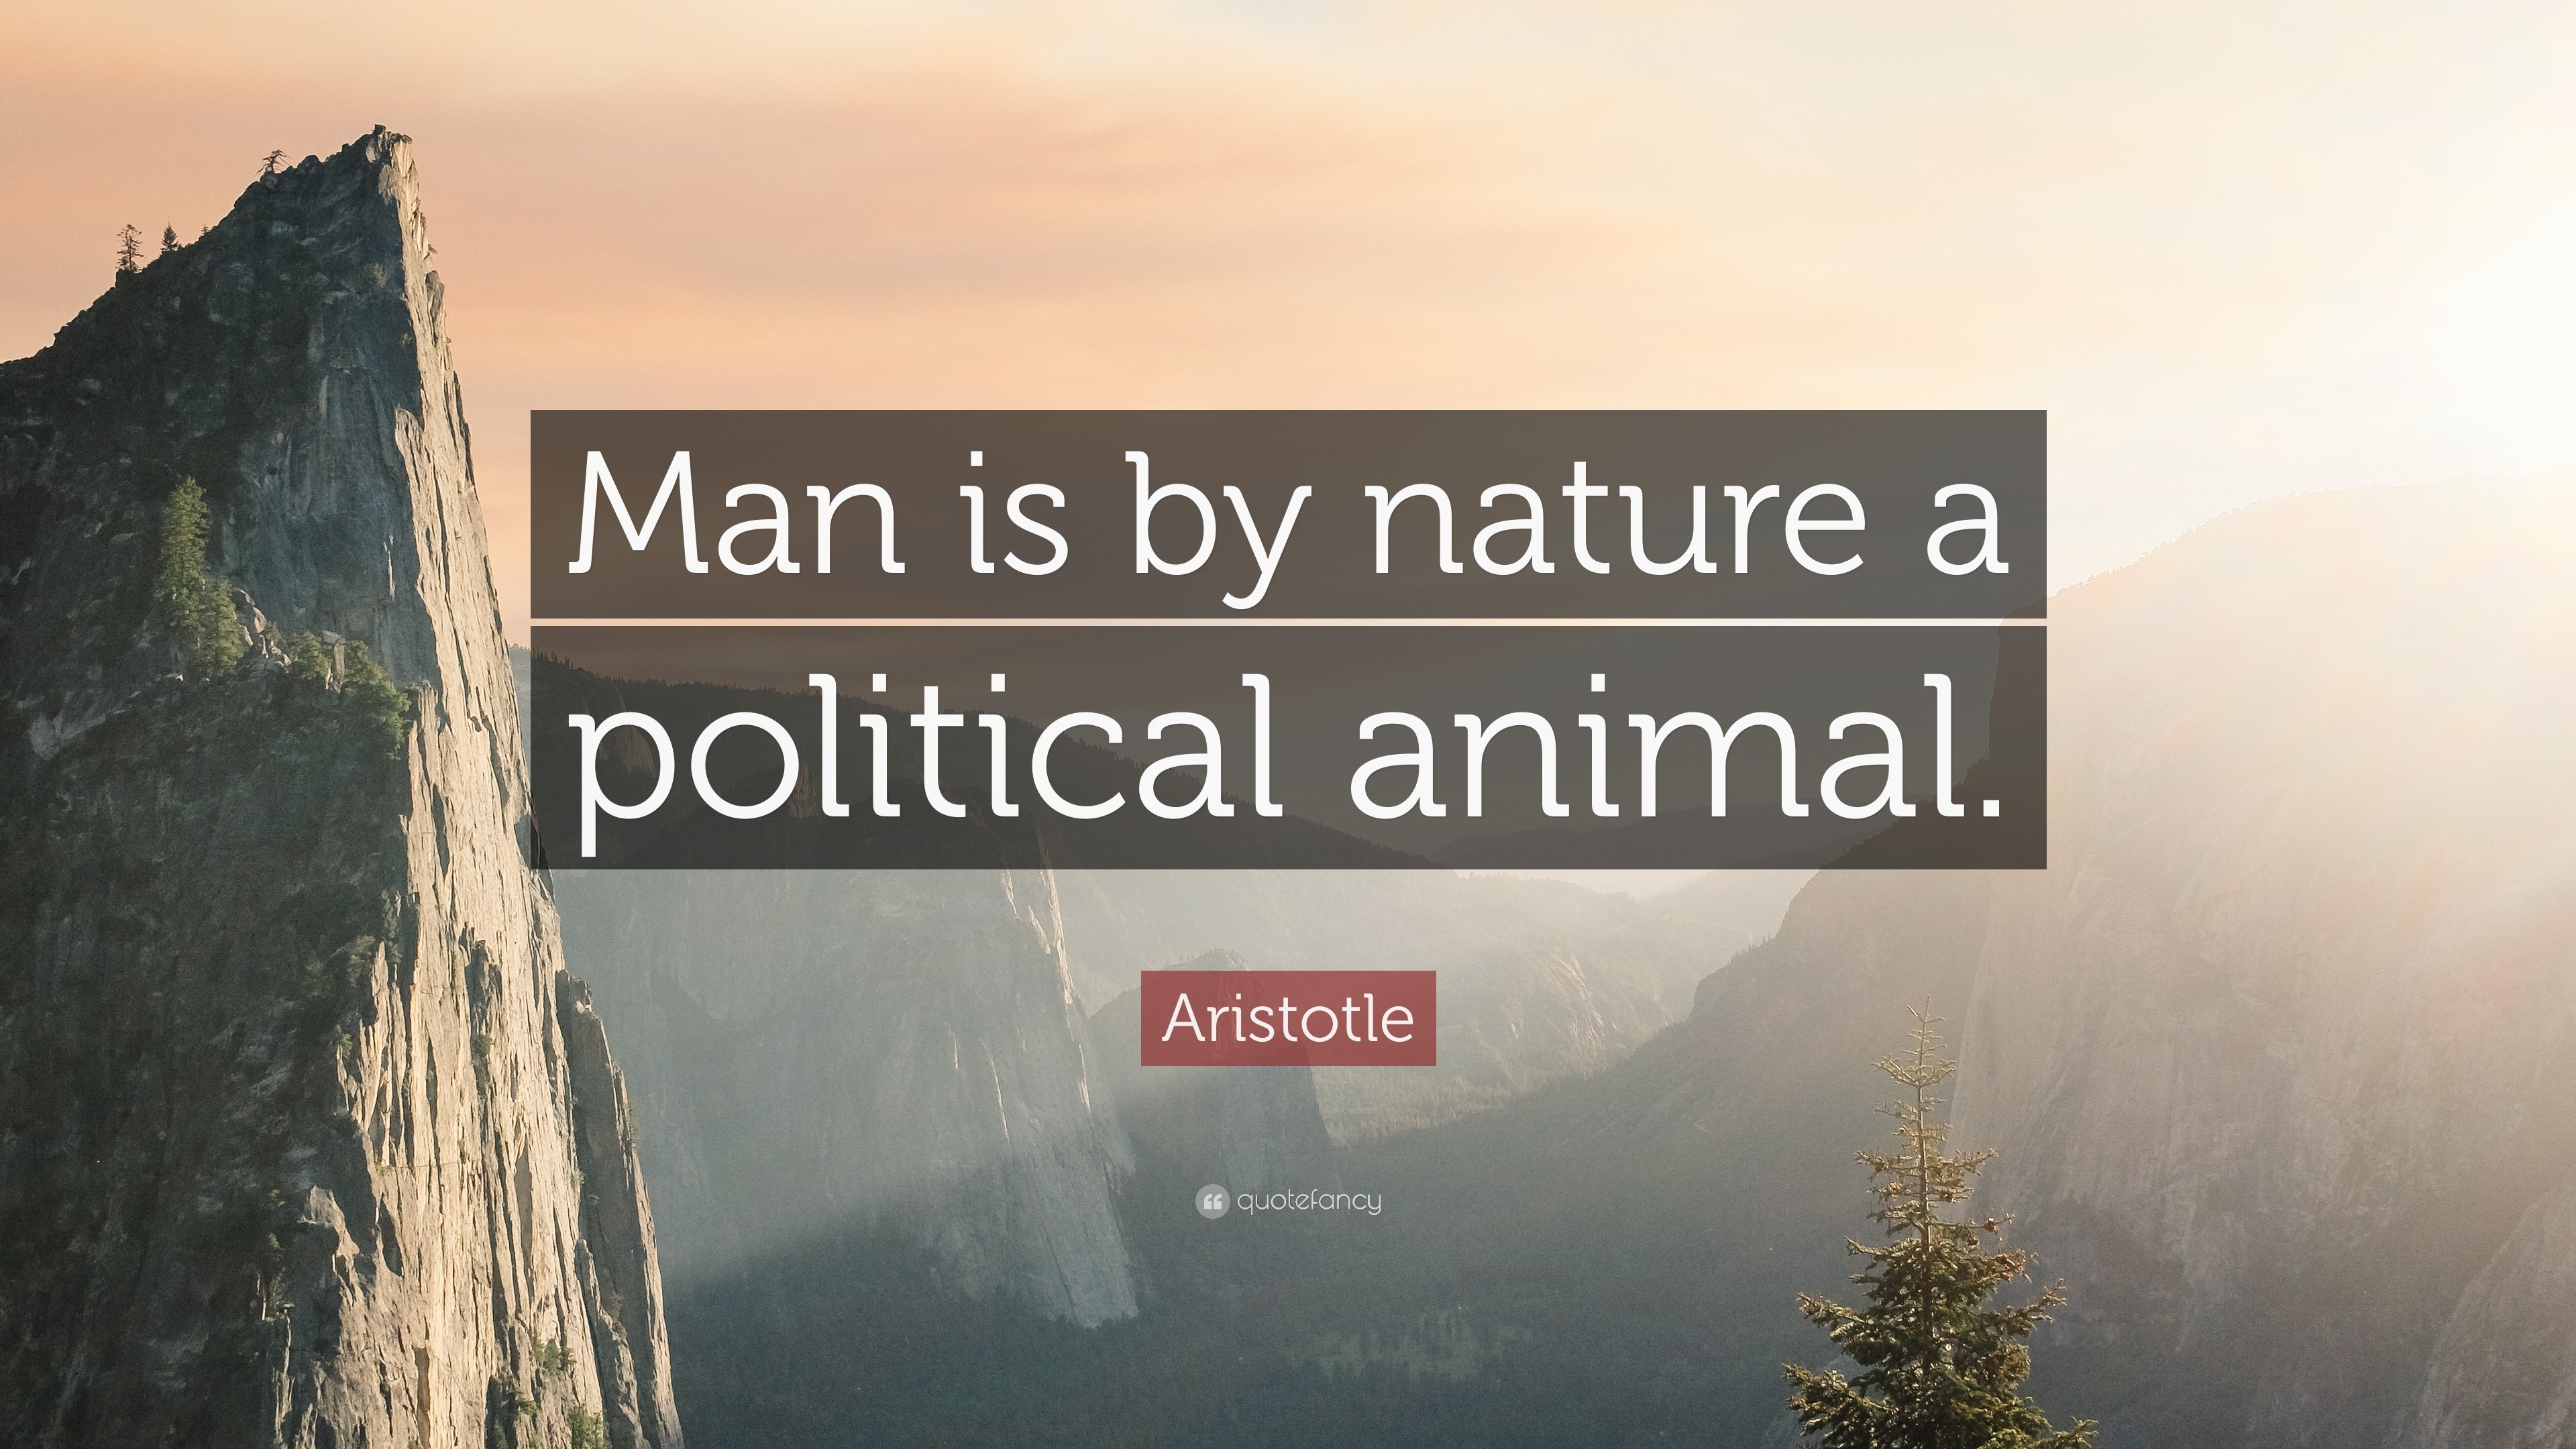 Aristotle Quote: “Man is by nature a political animal.”